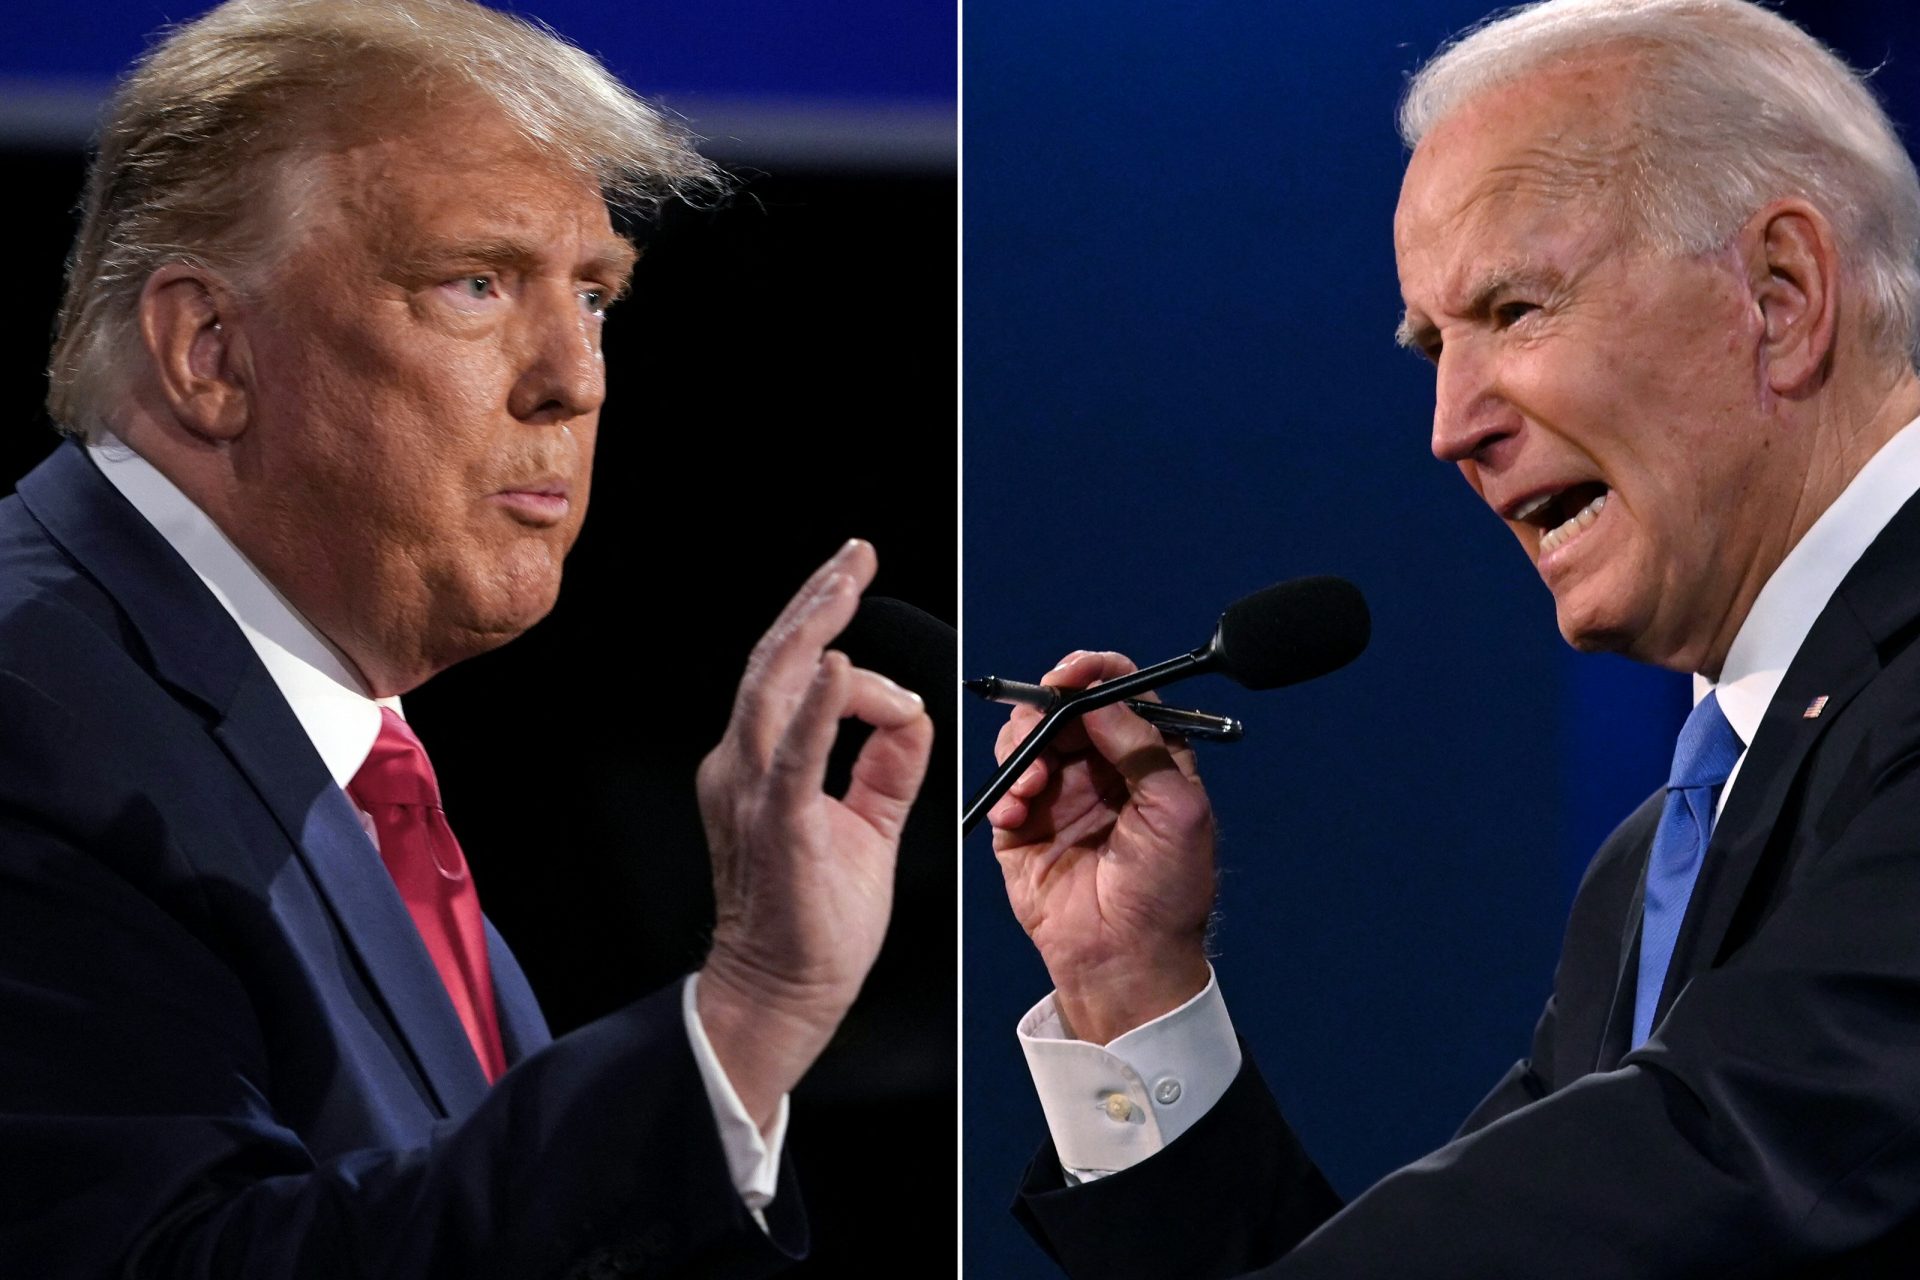 What would happen if Biden or Trump died?